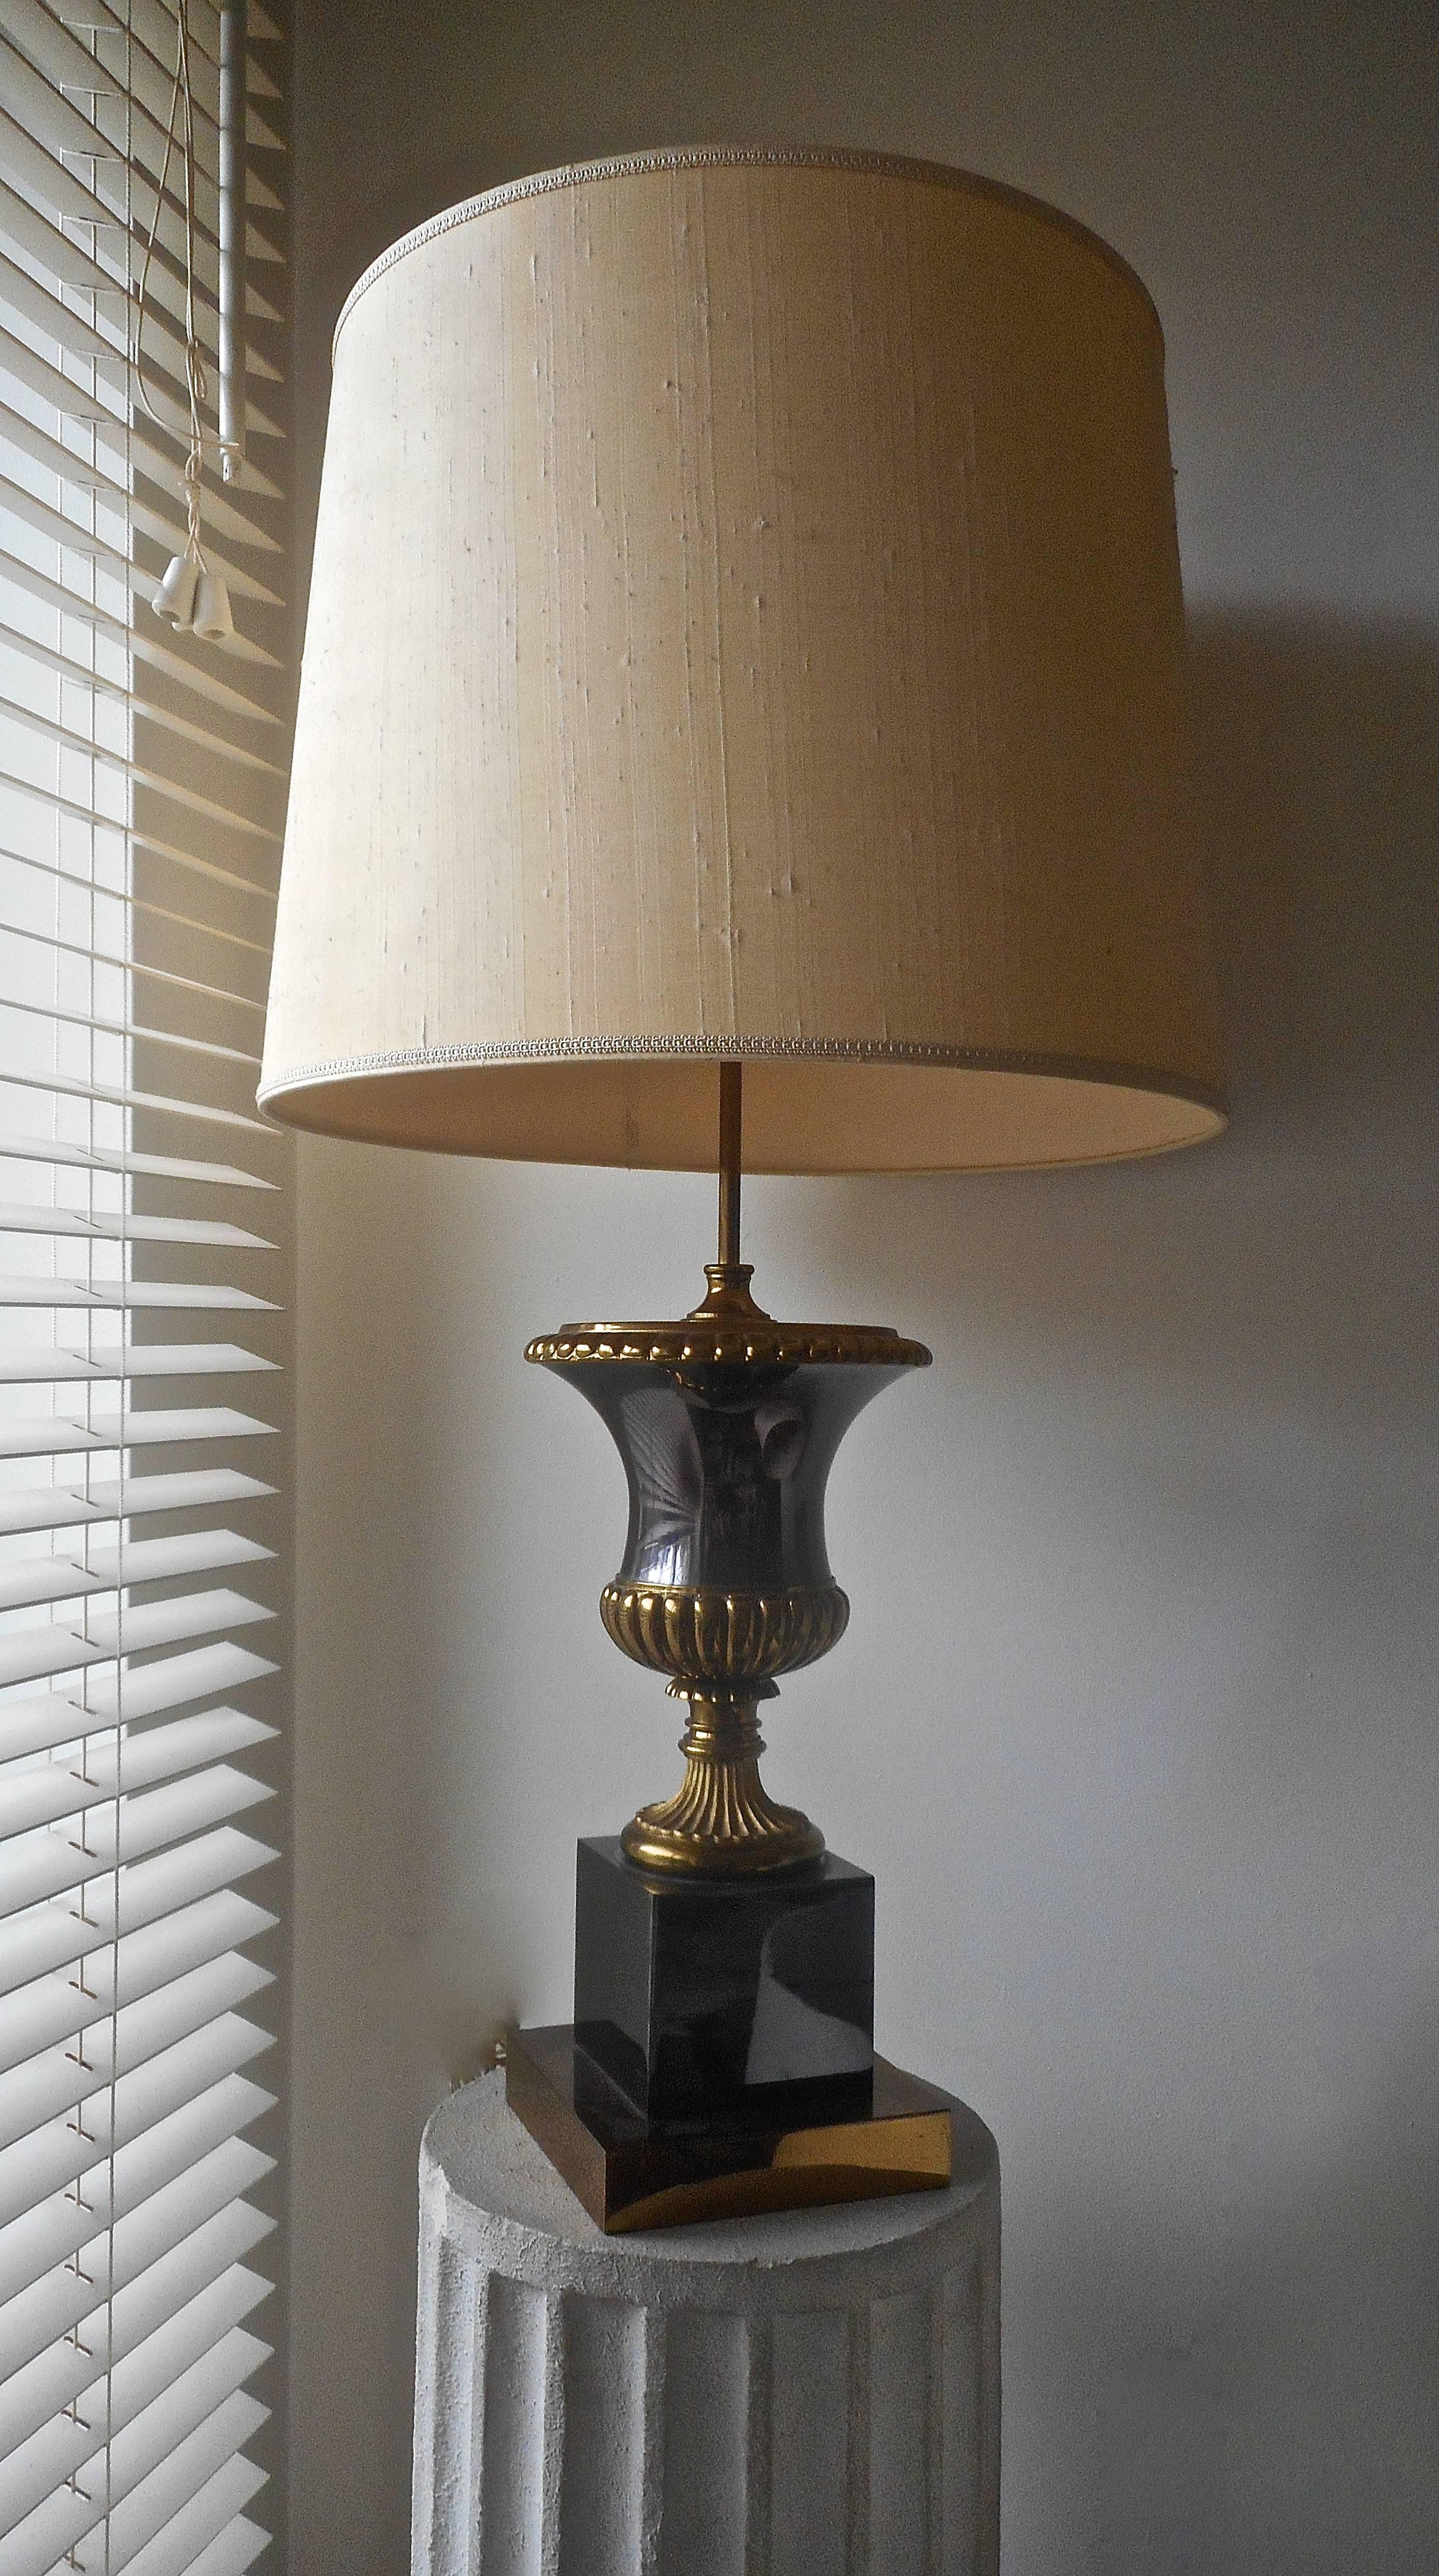 Mid-20th Century A Large Scale Neoclassical Desk Lamp by Maison Jansen